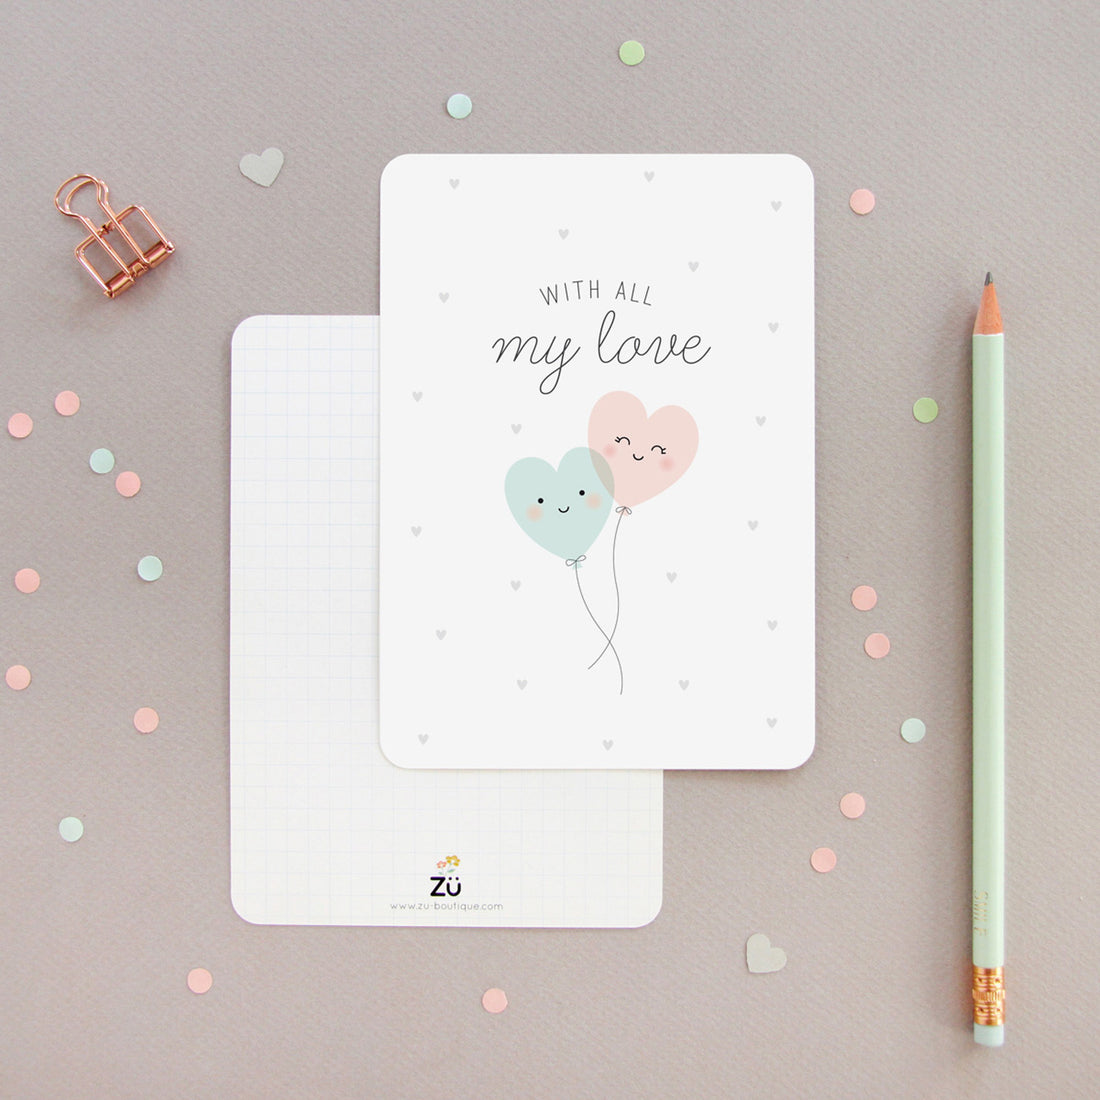 zu-boutique-card-with-all-my-love- (2)